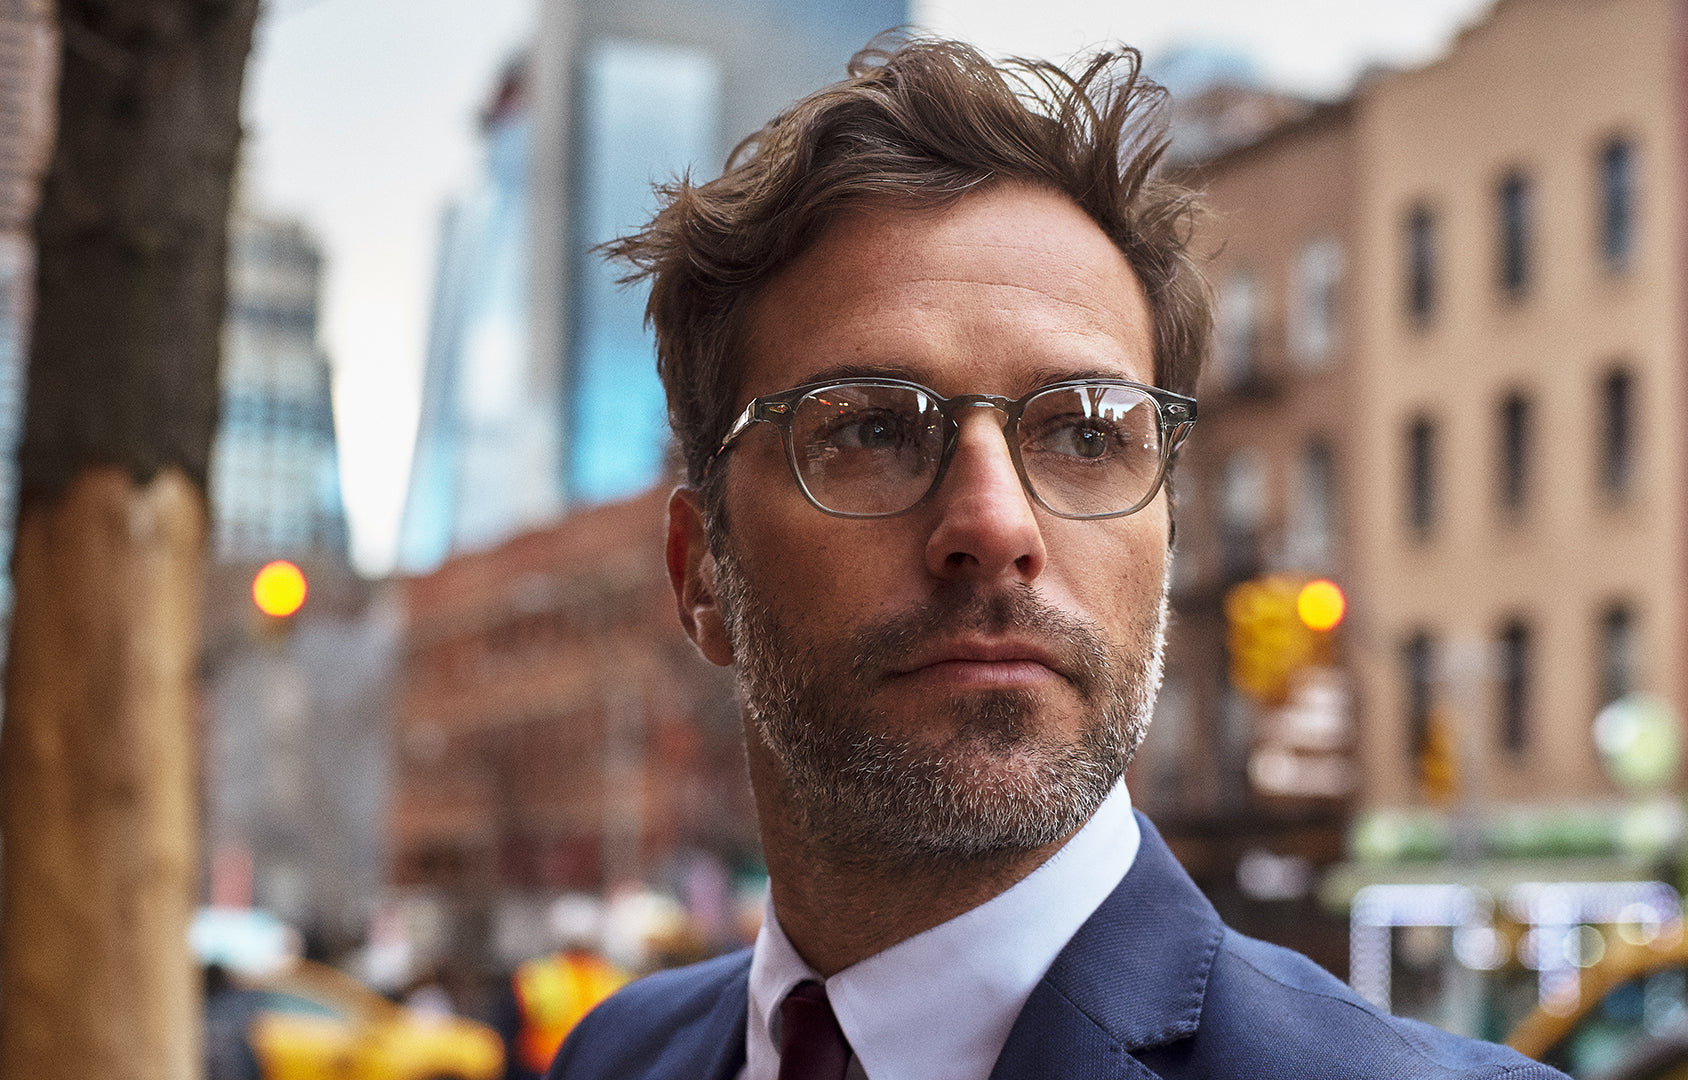 MOSCOT’s Fall 2018 Styles – MOSCOT NYC SINCE 1915